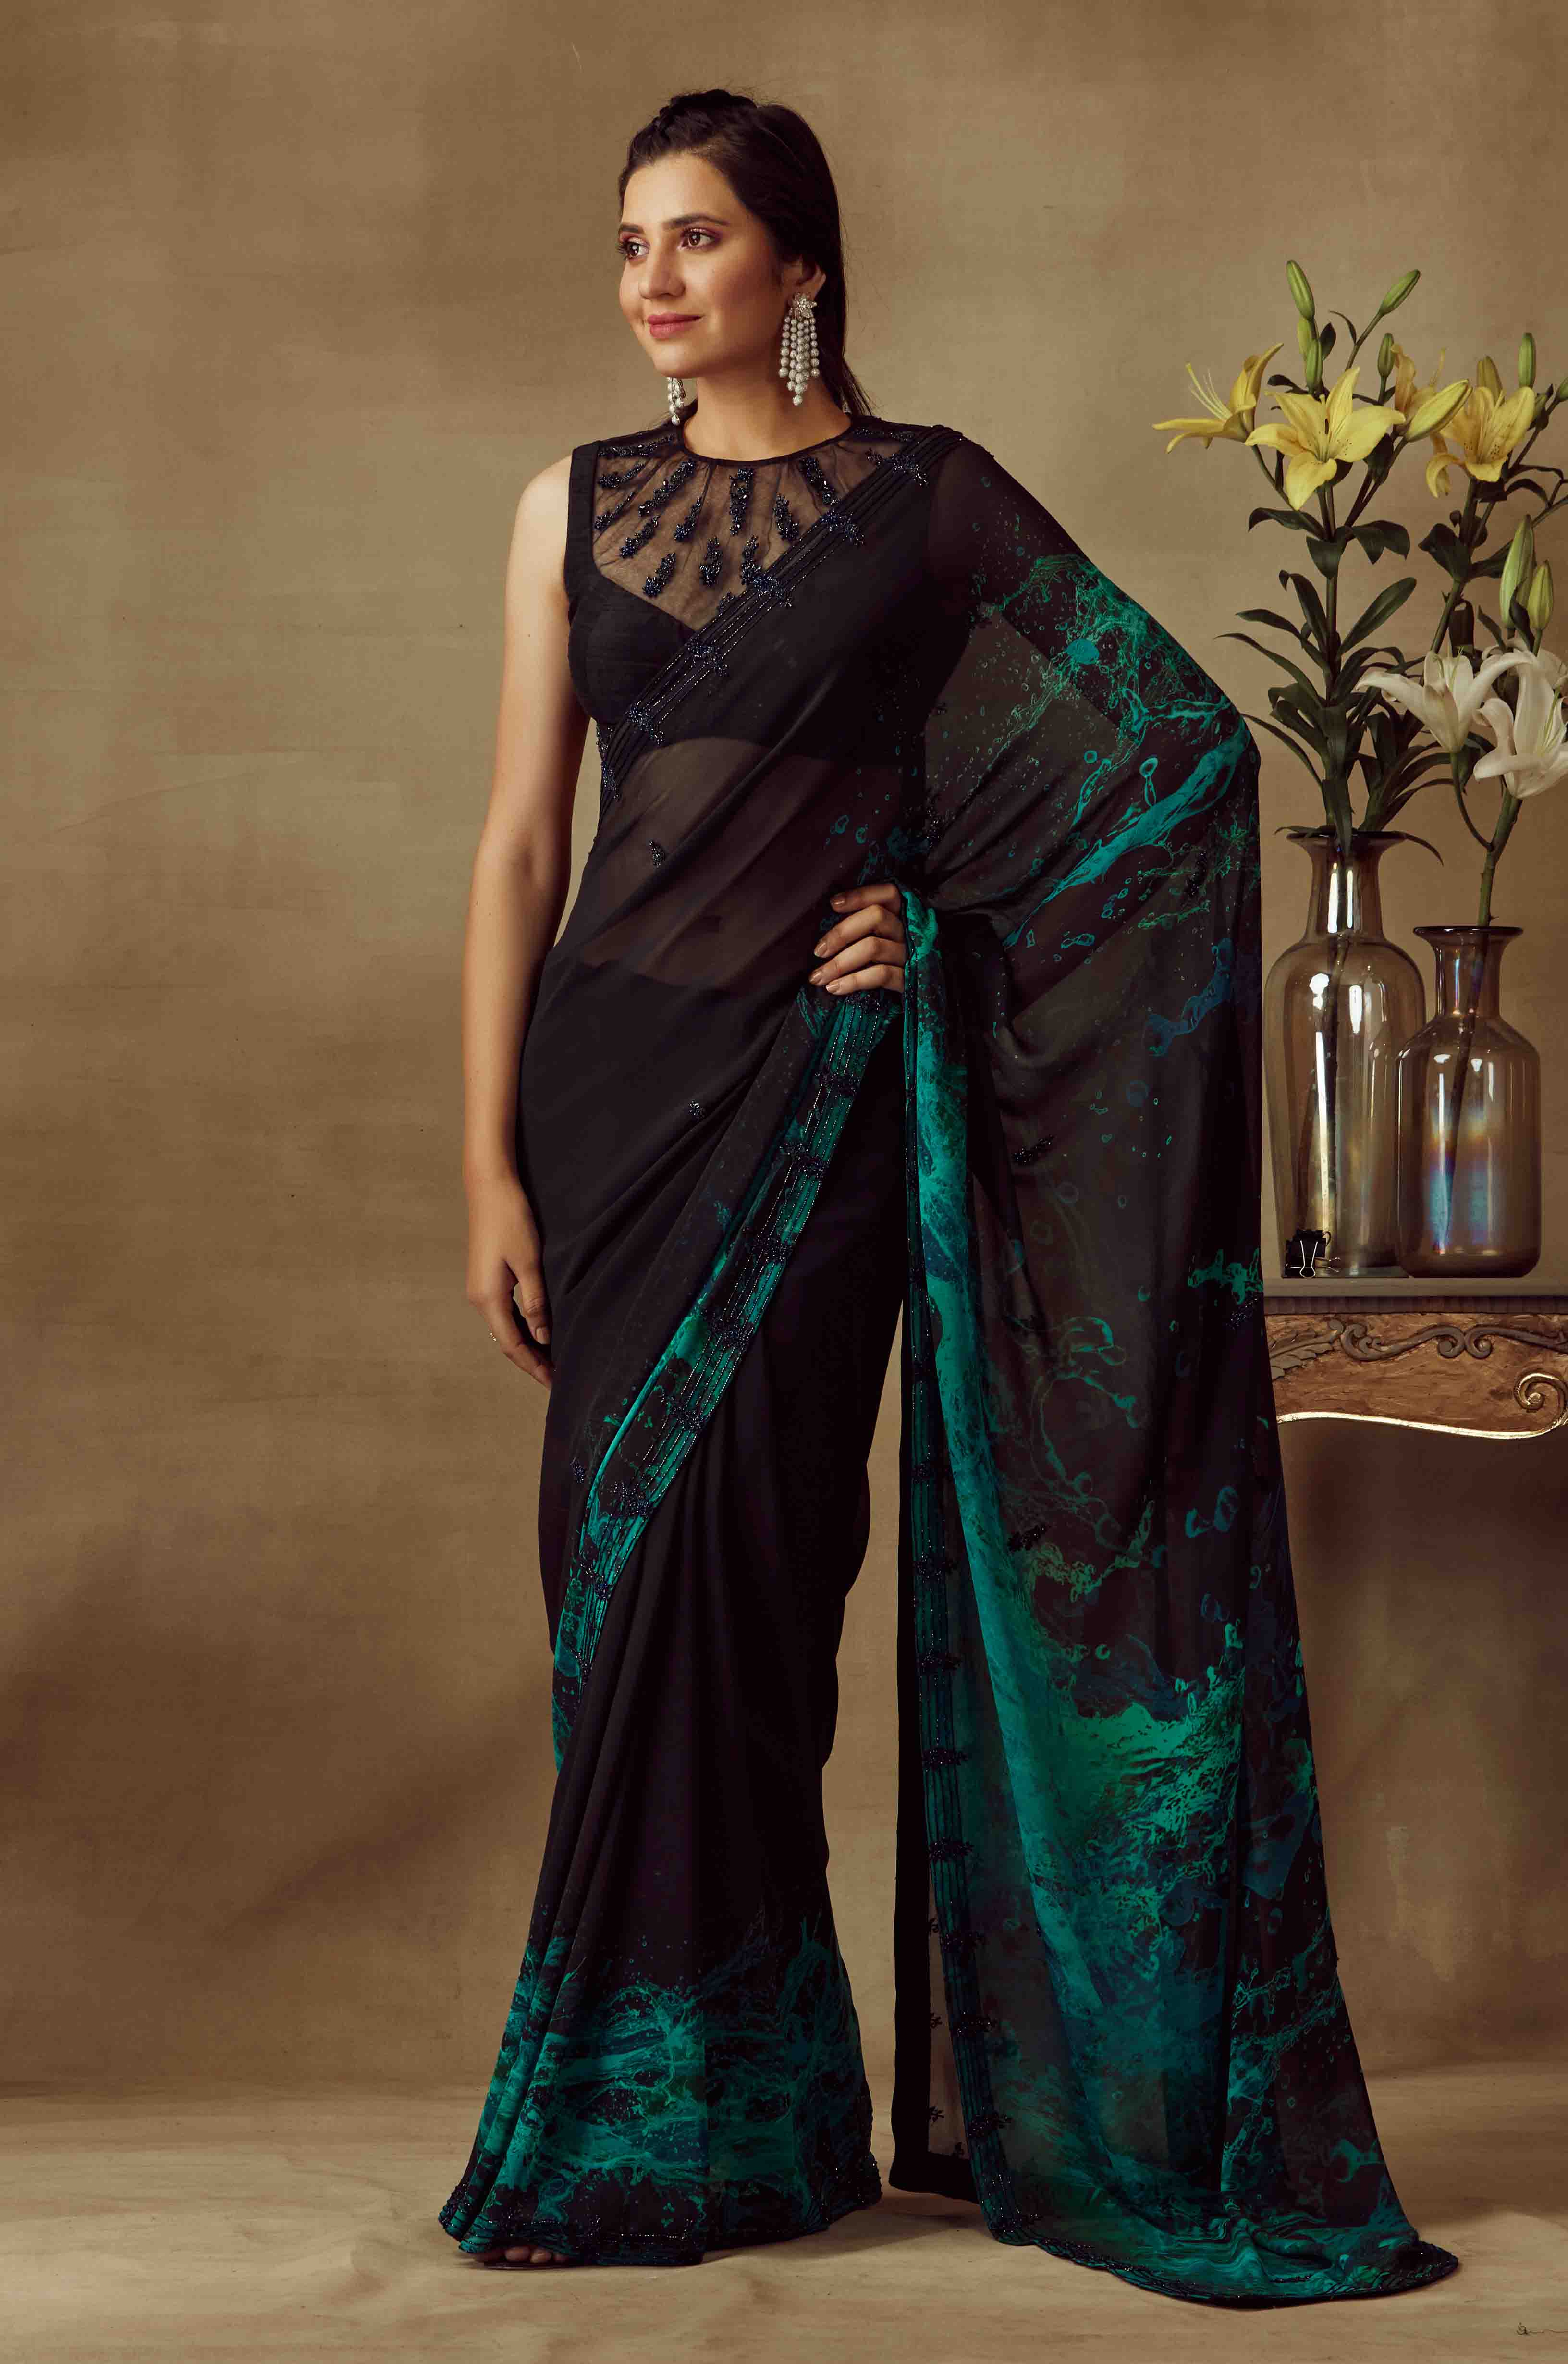 Printed Saree With High Neck Blouse